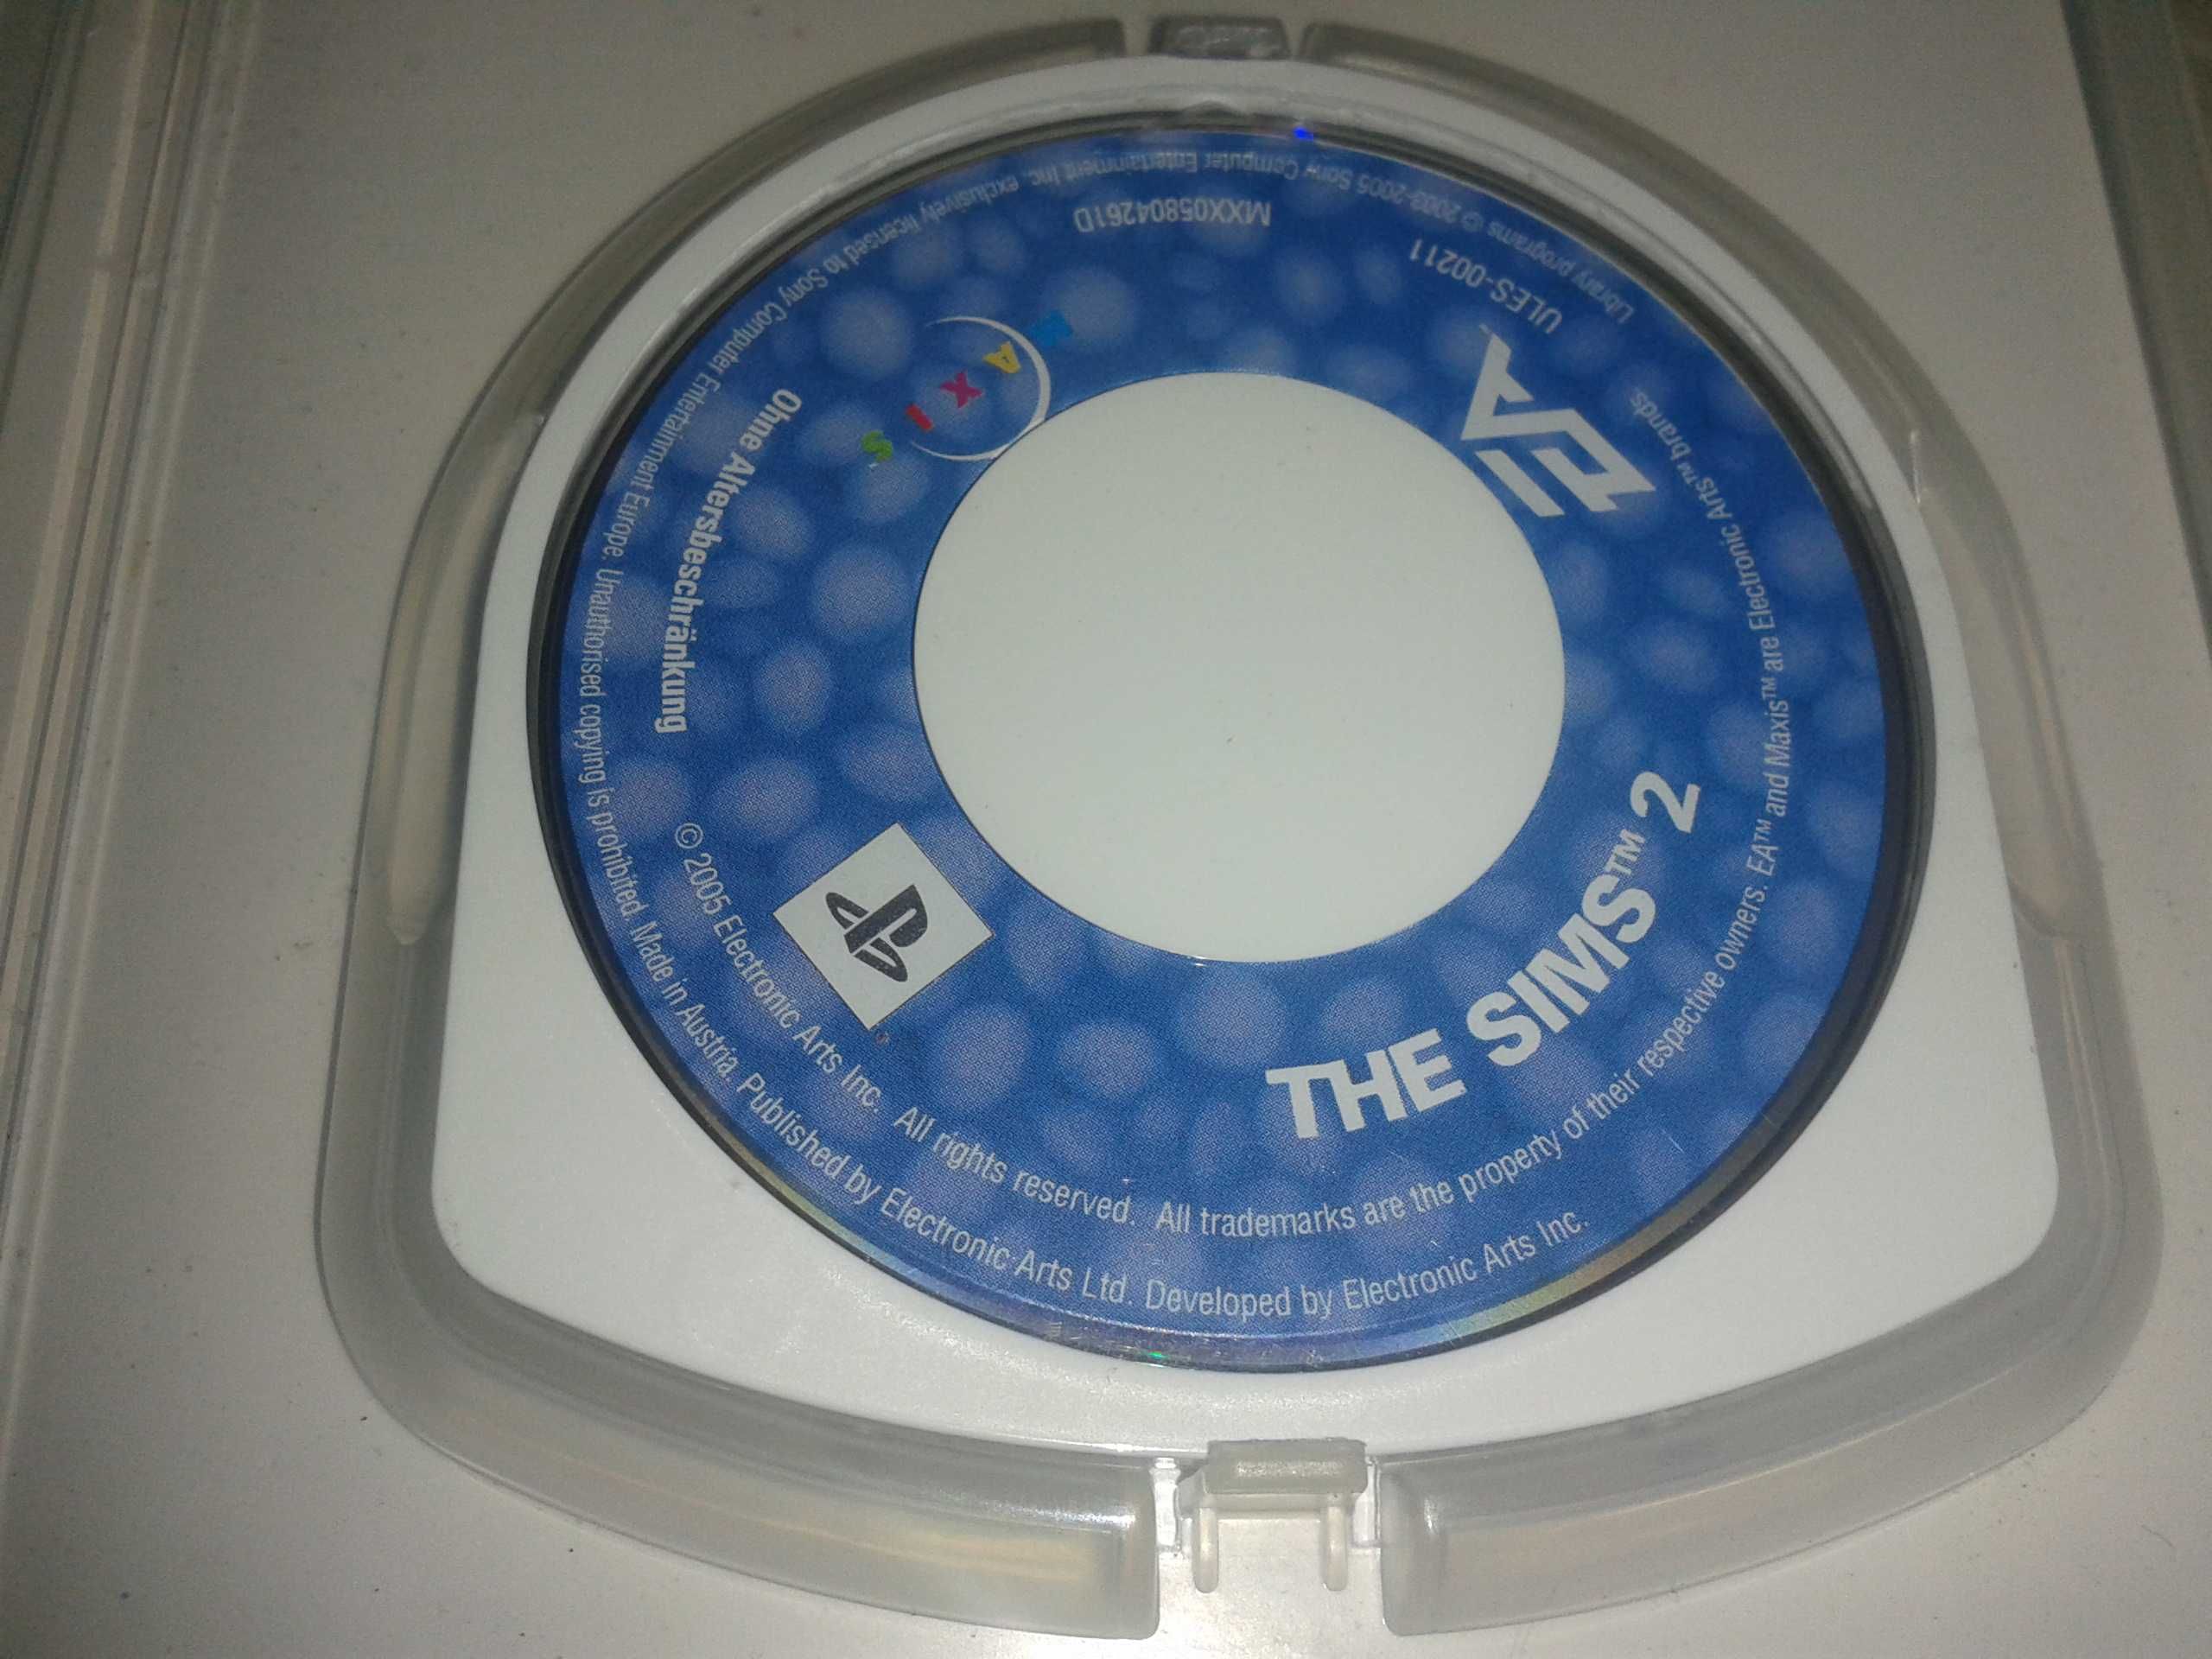 [PSP] The Sims 2